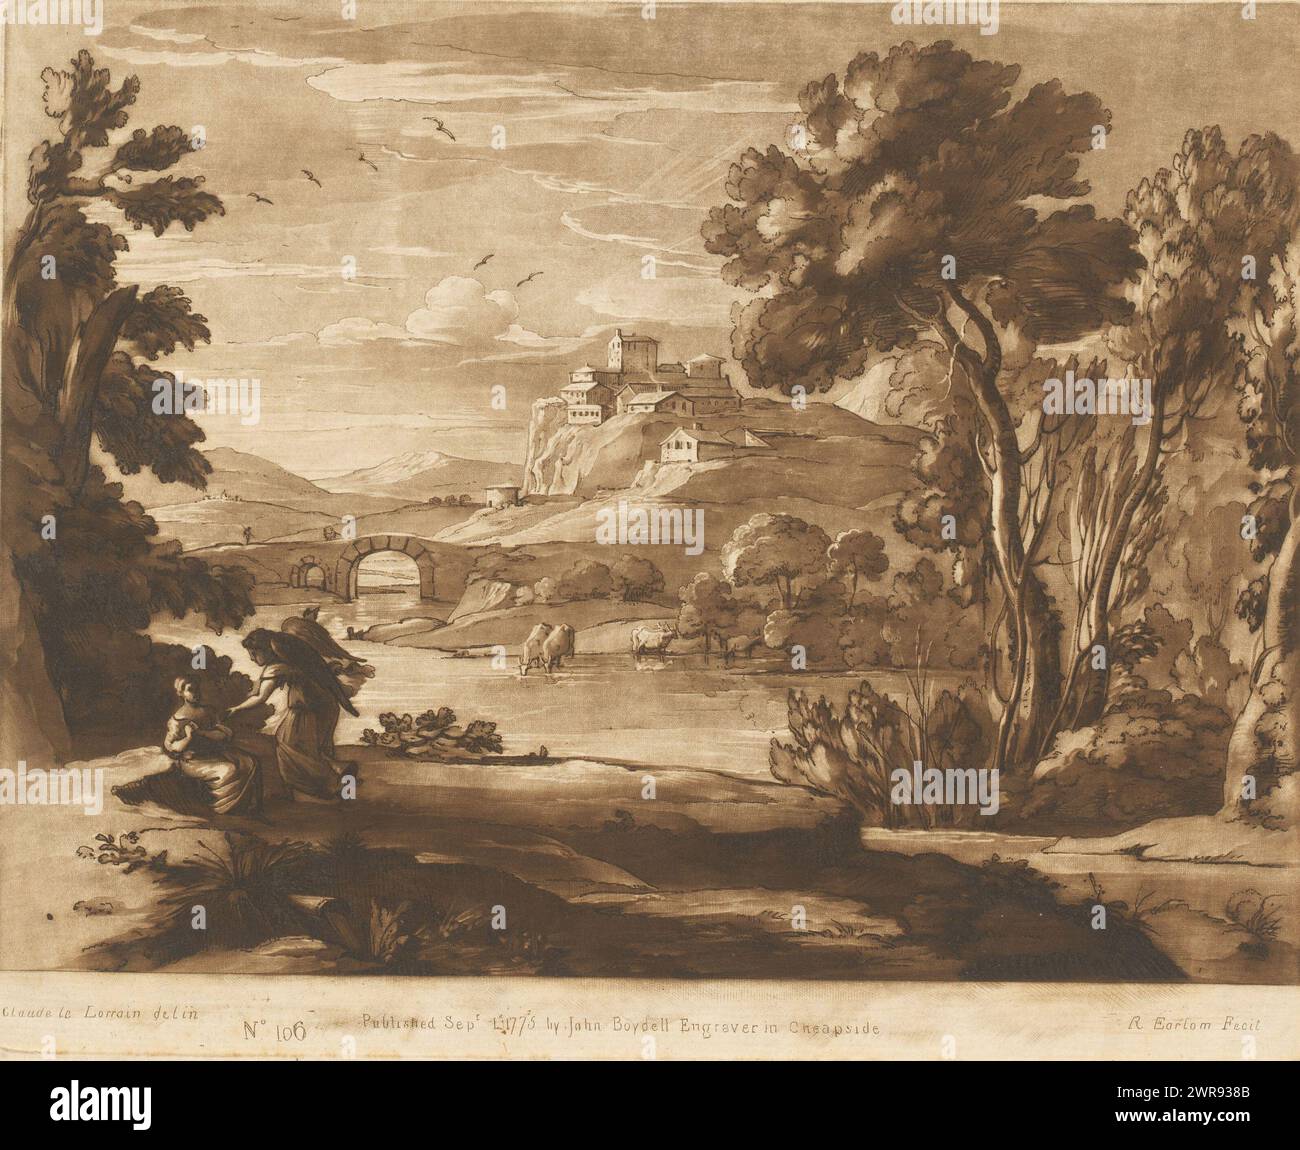 Landscape with angel telling Hagar to go back to Abraham and Sarah, Prints after drawings by Claude Lorrain (series title), Liber Veritatis. Or a Collection of Two Hundred Prints, after the original designs of Claude le Lorrain (...) (series title), print maker: Richard Earlom, after drawing by: Claude Lorrain, publisher: John Boydell, London, 1-Sep-1775, paper, etching, height 208 mm × width 258 mm, print Stock Photo